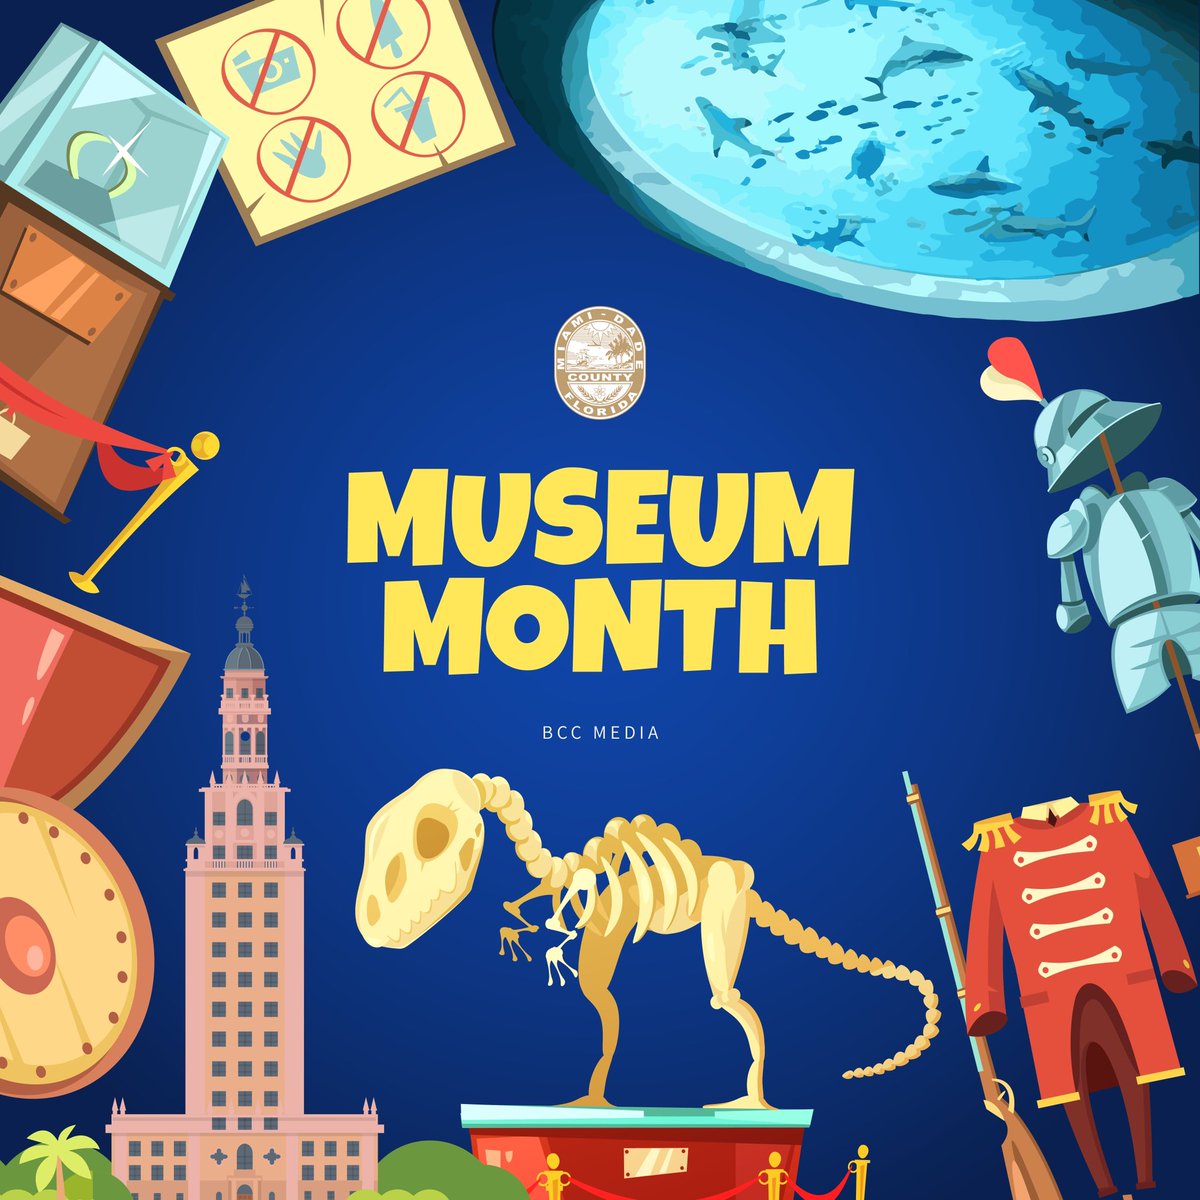 May is Museum Month, thanks to a resolution sponsored by Commissioner @RaquelRegalado to showcase #OurCounty's various art, history, and science museums that offer our community educational opportunities.